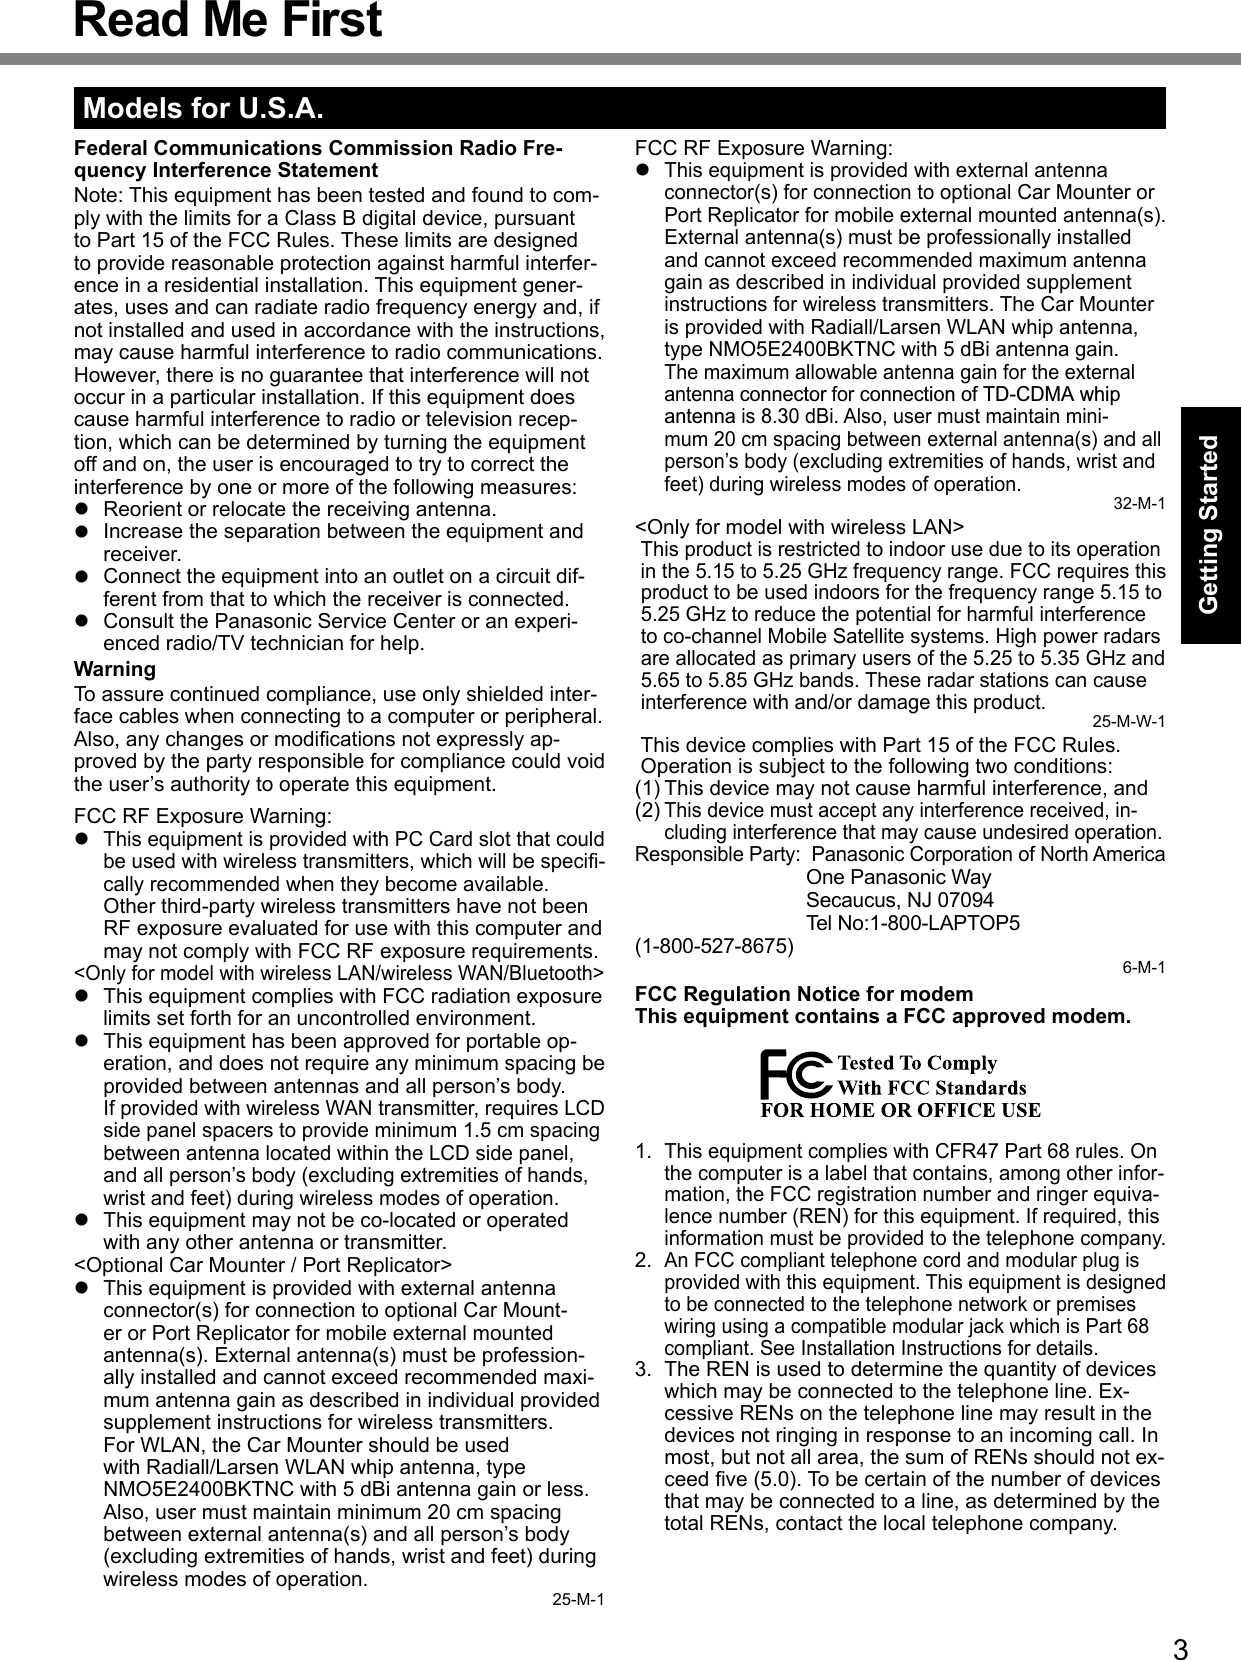 3Getting StartedRead Me FirstModels for U.S.A.Federal Communications Commission Radio Fre-quency Interference StatementNote: This equipment has been tested and found to com-ply with the limits for a Class B digital device, pursuant to Part 15 of the FCC Rules. These limits are designed to provide reasonable protection against harmful interfer-ence in a residential installation. This equipment gener-ates, uses and can radiate radio frequency energy and, if not installed and used in accordance with the instructions, may cause harmful interference to radio communications. However, there is no guarantee that interference will not occur in a particular installation. If this equipment does cause harmful interference to radio or television recep-tion, which can be determined by turning the equipment off and on, the user is encouraged to try to correct the interference by one or more of the following measures:l  Reorient or relocate the receiving antenna.l  Increase the separation between the equipment and receiver.l  Connect the equipment into an outlet on a circuit dif-ferent from that to which the receiver is connected.l  Consult the Panasonic Service Center or an experi-enced radio/TV technician for help.WarningTo assure continued compliance, use only shielded inter-face cables when connecting to a computer or peripheral.  Also,anychangesormodicationsnotexpresslyap-proved by the party responsible for compliance could void the user’s authority to operate this equipment.FCC RF Exposure Warning:l This equipment is provided with PC Card slot that could beusedwithwirelesstransmitters,whichwillbespeci-cally recommended when they become available.Other third-party wireless transmitters have not been RF exposure evaluated for use with this computer and may not comply with FCC RF exposure requirements.&lt;Only for model with wireless LAN/wireless WAN/Bluetooth&gt;l  This equipment complies with FCC radiation exposure limits set forth for an uncontrolled environment.l  This equipment has been approved for portable op-eration, and does not require any minimum spacing be provided between antennas and all person’s body.If provided with wireless WAN transmitter, requires LCD side panel spacers to provide minimum 1.5 cm spacing between antenna located within the LCD side panel, and all person’s body (excluding extremities of hands, wrist and feet) during wireless modes of operation.l  This equipment may not be co-located or operated with any other antenna or transmitter.&lt;Optional Car Mounter / Port Replicator&gt;l  This equipment is provided with external antenna connector(s) for connection to optional Car Mount-er or Port Replicator for mobile external mounted antenna(s). External antenna(s) must be profession-ally installed and cannot exceed recommended maxi-mum antenna gain as described in individual provided supplement instructions for wireless transmitters.  For WLAN, the Car Mounter should be used with Radiall/Larsen WLAN whip antenna, type NMO5E2400BKTNC with 5 dBi antenna gain or less. Also, user must maintain minimum 20 cm spacing between external antenna(s) and all person’s body (excluding extremities of hands, wrist and feet) during wireless modes of operation. 25-M-1FCC RF Exposure Warning:l This equipment is provided with external antenna connector(s) for connection to optional Car Mounter or Port Replicator for mobile external mounted antenna(s). External antenna(s) must be professionally installed and cannot exceed recommended maximum antenna gain as described in individual provided supplement instructions for wireless transmitters. The Car Mounter is provided with Radiall/Larsen WLAN whip antenna, type NMO5E2400BKTNC with 5 dBi antenna gain.The maximum allowable antenna gain for the external antenna connector for connection of TD-CDMA whipantenna is 8.30 dBi. Also, user must maintain mini-mum 20 cm spacing between external antenna(s) and all person’s body (excluding extremities of hands, wrist and feet) during wireless modes of operation.32-M-1&lt;Only for model with wireless LAN&gt;This product is restricted to indoor use due to its operation in the 5.15 to 5.25 GHz frequency range. FCC requires this product to be used indoors for the frequency range 5.15 to 5.25 GHz to reduce the potential for harmful interference to co-channel Mobile Satellite systems. High power radars are allocated as primary users of the 5.25 to 5.35 GHz and 5.65 to 5.85 GHz bands. These radar stations can cause interference with and/or damage this product.25-M-W-1This device complies with Part 15 of the FCC Rules. Operation is subject to the following two conditions:(1) This device may not cause harmful interference, and(2) This device must accept any interference received, in-cluding interference that may cause undesired operation.Responsible Party:  Panasonic Corporation of North America  One Panasonic Way  Secaucus, NJ 07094  Tel No:1-800-LAPTOP5 (1-800-527-8675)6-M-1FCC Regulation Notice for modem This equipment contains a FCC approved modem.1. This equipment complies with CFR47 Part 68 rules. On the computer is a label that contains, among other infor-mation, the FCC registration number and ringer equiva-lence number (REN) for this equipment. If required, this information must be provided to the telephone company.2. An FCC compliant telephone cord and modular plug is provided with this equipment. This equipment is designed to be connected to the telephone network or premises wiring using a compatible modular jack which is Part 68 compliant. See Installation Instructions for details.3.  The REN is used to determine the quantity of devices which may be connected to the telephone line. Ex-cessive RENs on the telephone line may result in the devices not ringing in response to an incoming call. In most, but not all area, the sum of RENs should not ex-ceedve(5.0).Tobecertainofthenumberofdevicesthat may be connected to a line, as determined by the total RENs, contact the local telephone company.